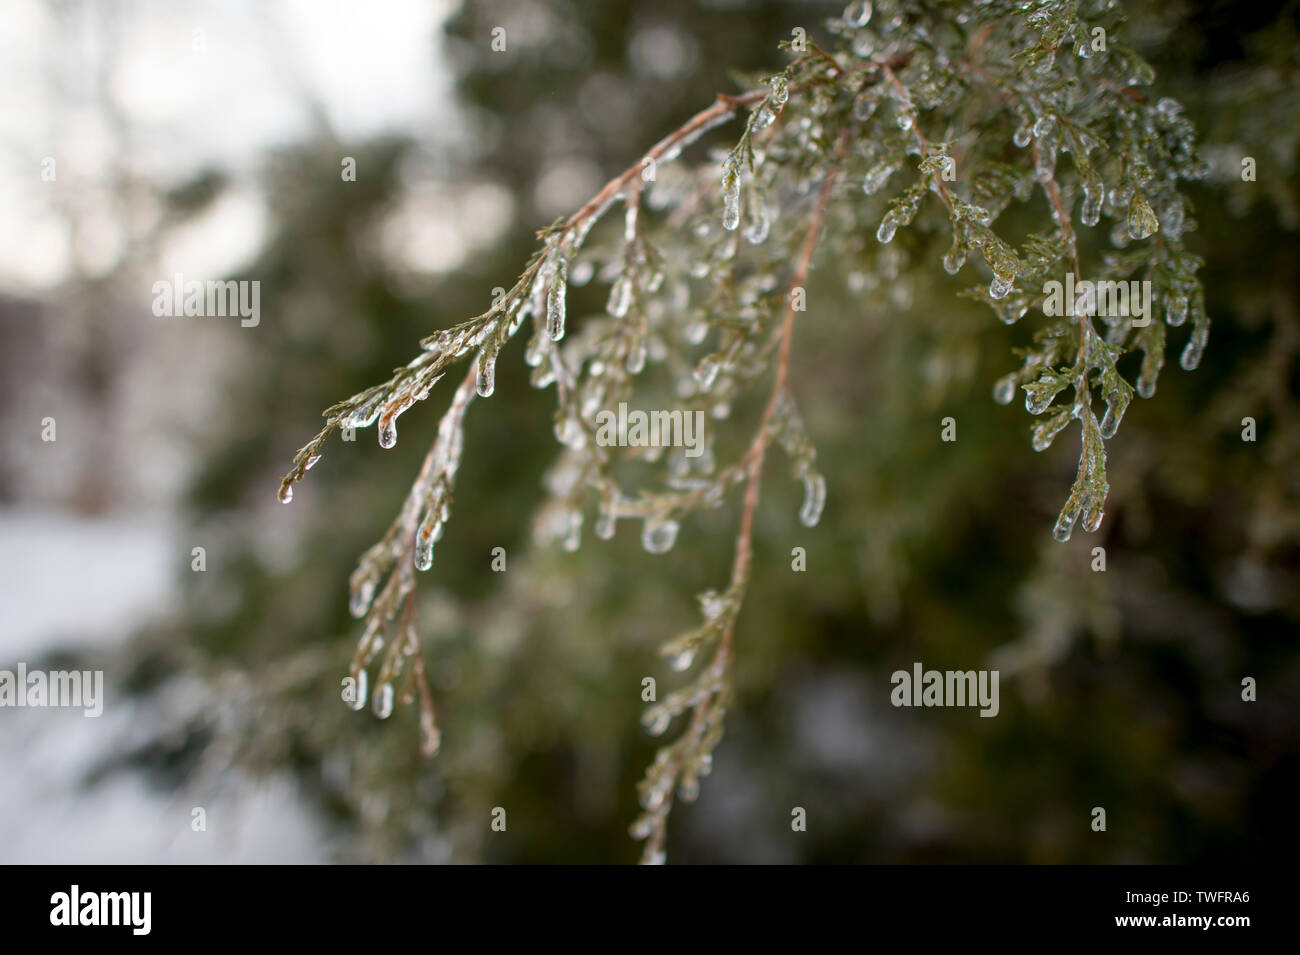 https://c8.alamy.com/comp/TWFRA6/a-bunch-of-branches-covered-in-ice-and-water-drops-on-a-cold-winter-day-with-soft-overcast-light-TWFRA6.jpg